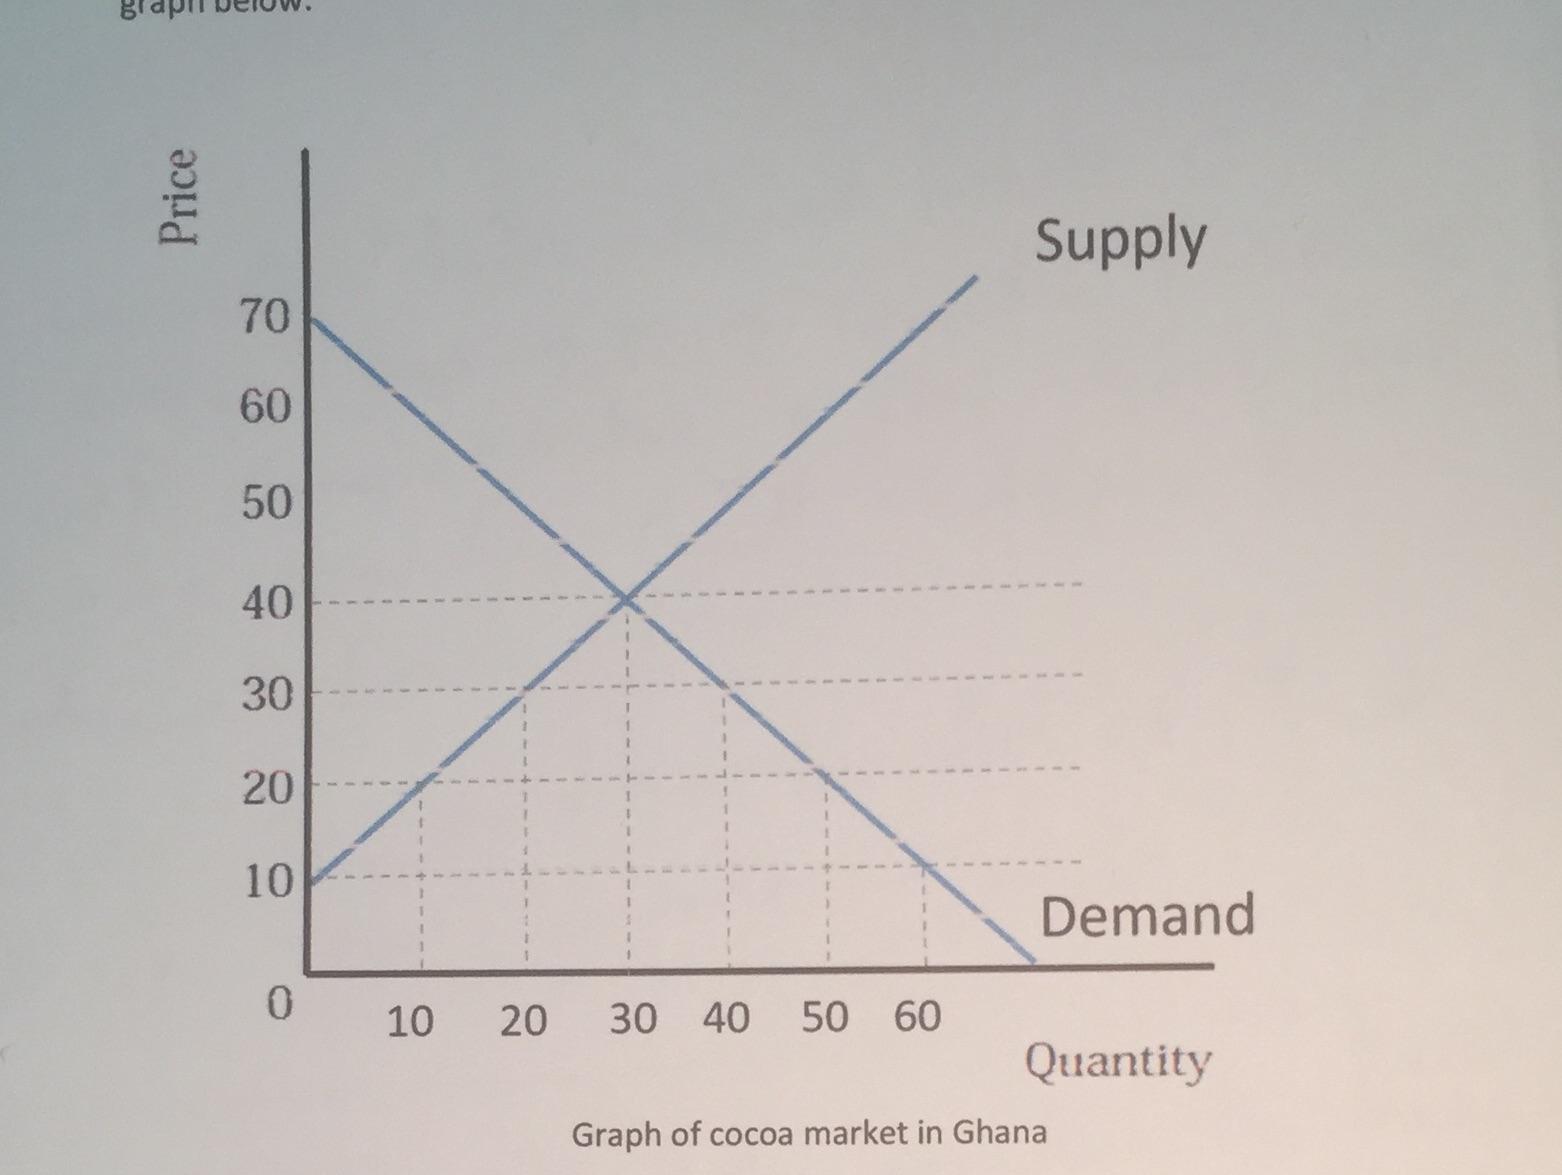 Price 70 60 50 40 30 20 10 0 10 20 30 40 50 60 Supply Demand Quantity Graph of cocoa market in Ghana